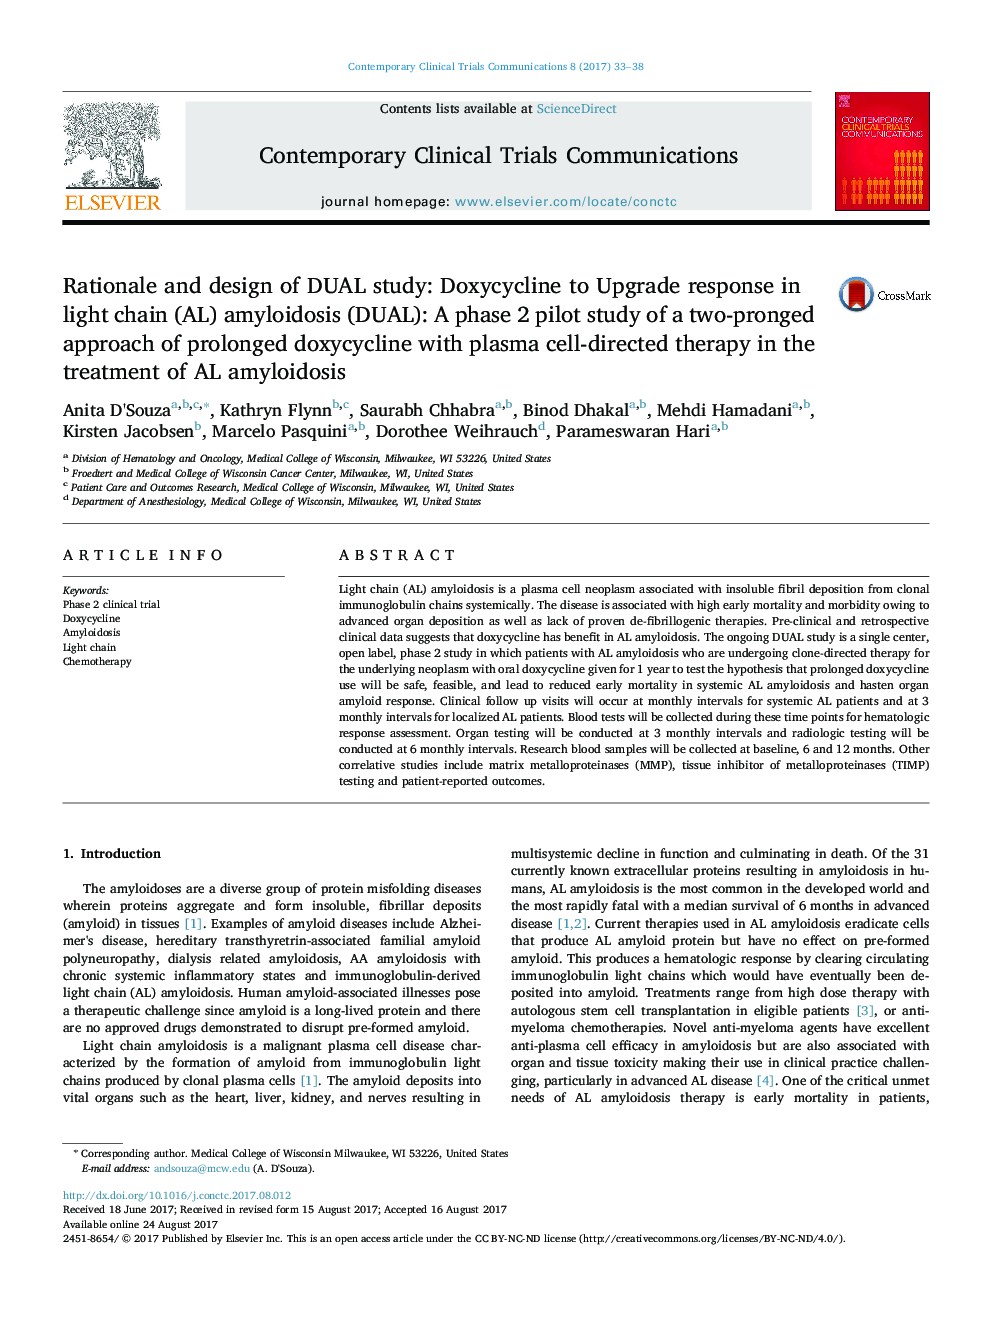 Rationale and design of DUAL study: Doxycycline to Upgrade response in light chain (AL) amyloidosis (DUAL): A phase 2 pilot study of a two-pronged approach of prolonged doxycycline with plasma cell-directed therapy in the treatment of AL amyloidosis